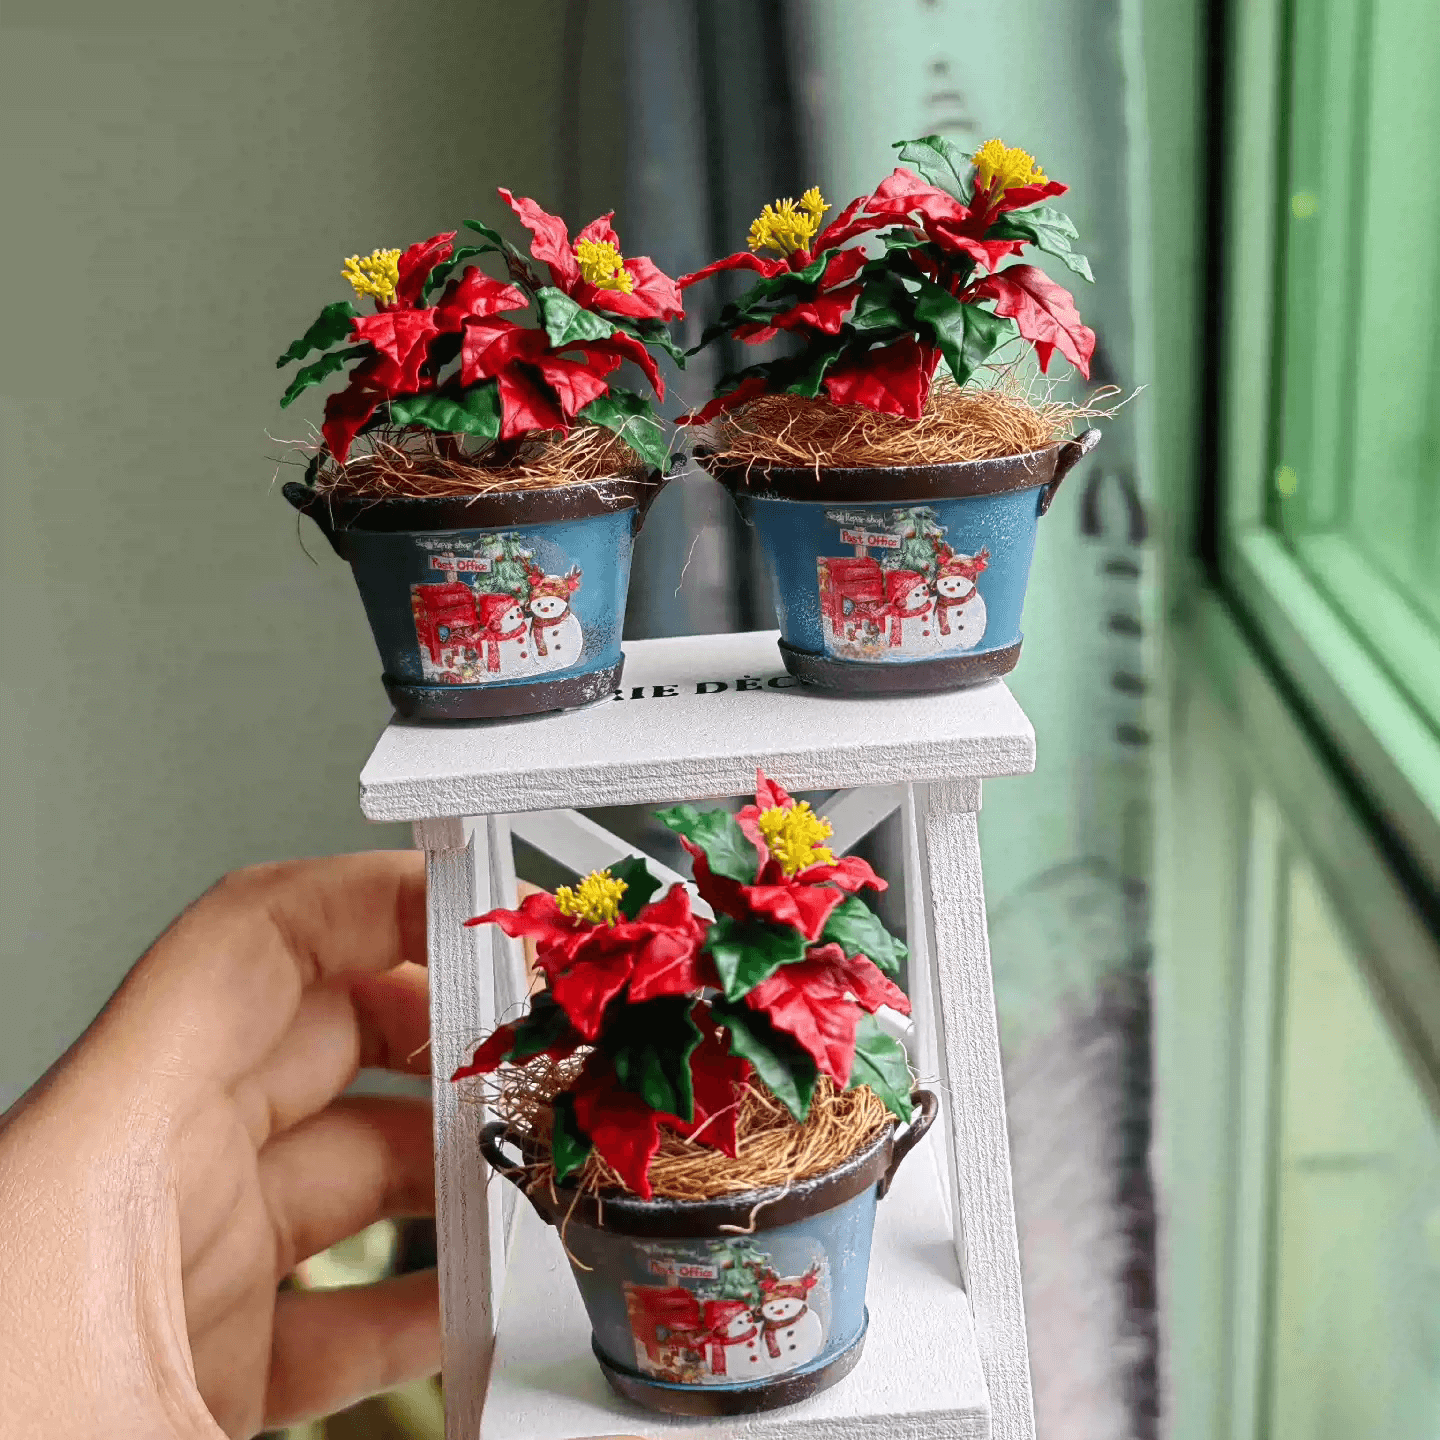 Poinsettia (Euphorbia pulcherrima) is a classic holiday plant, known for its festive red bracts set against green leaves.  This miniature Christmas Flower Euphorbia pulcherrima (Poinsettia)  ornaments will look stunning on a table setting or dollhouse.  Material: Handmade from Clay